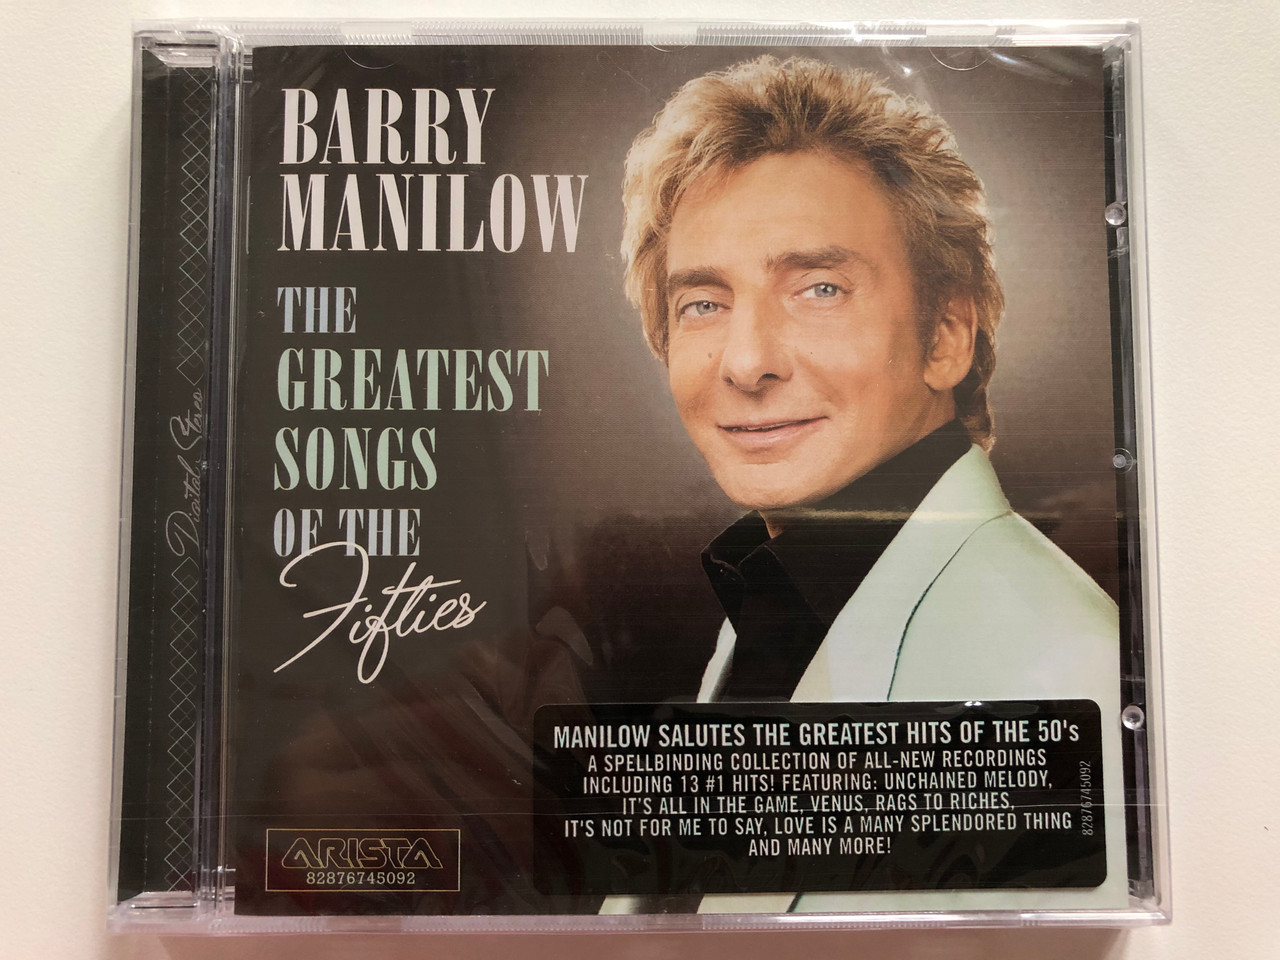 https://cdn10.bigcommerce.com/s-62bdpkt7pb/products/0/images/207835/Barry_Manilow_The_Greatest_Songs_Of_The_Fifties_Manilow_Salutes_The_Greatest_Hits_Of_The_50s._A_Spellbinding_Collection_Of_All-New_Recordings_Including_13_1_Hits_Featuring_Unchained_Me_1__83432.1642495954.1280.1280.JPG?c=2&_gl=1*1szxsgy*_ga*MjA2NTIxMjE2MC4xNTkwNTEyNTMy*_ga_WS2VZYPC6G*MTY0MjQ4NzMxNy4yNjUuMS4xNjQyNDk1NTQ1LjU5